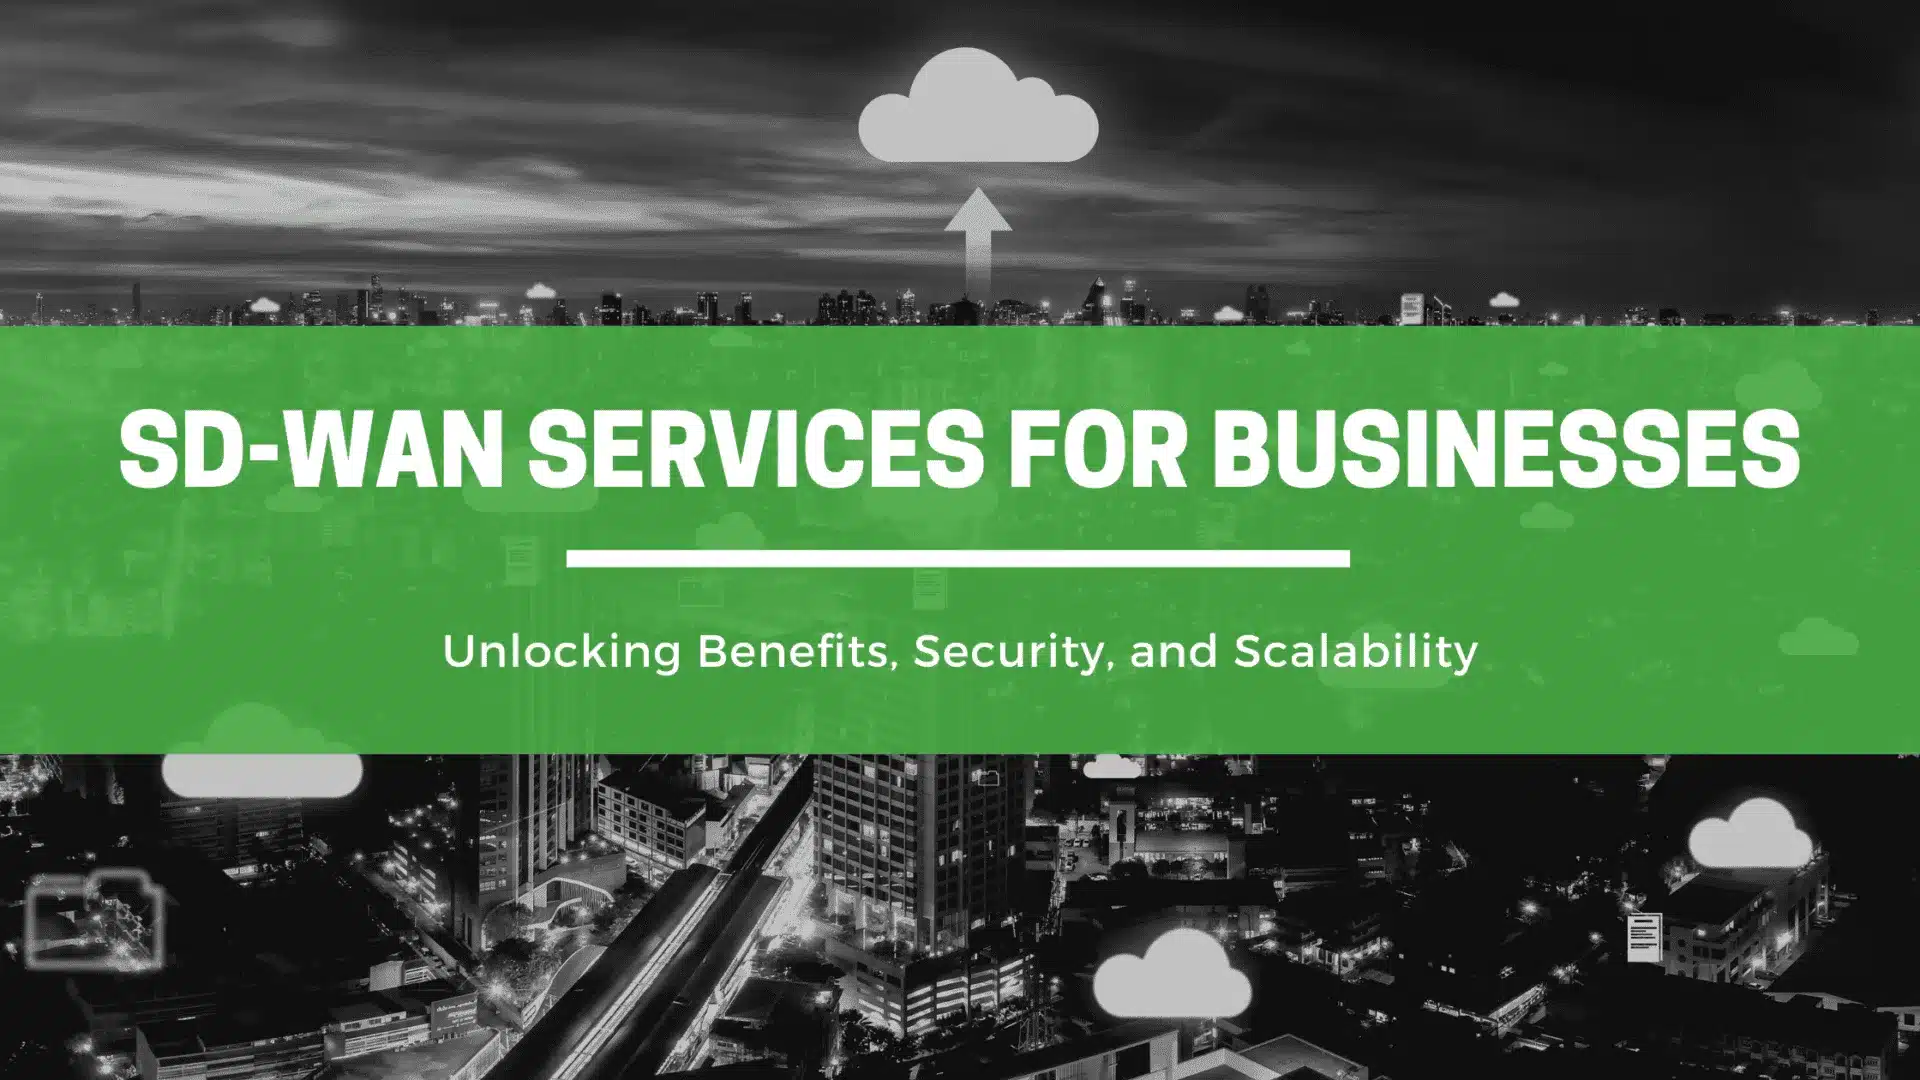 SD-WAN services for business Benefits of SD-WAN for businesses Cloud-based applications and SD-WAN Cost-effective SD-WAN solutions Enhancing network security with SD-WAN Scalable SD-WAN for growing businesses Simplifying network management with SD-WAN Optimizing network performance with SD-WAN Finding the best SD-WAN service provider Partnering with an SD-WAN agent for business success